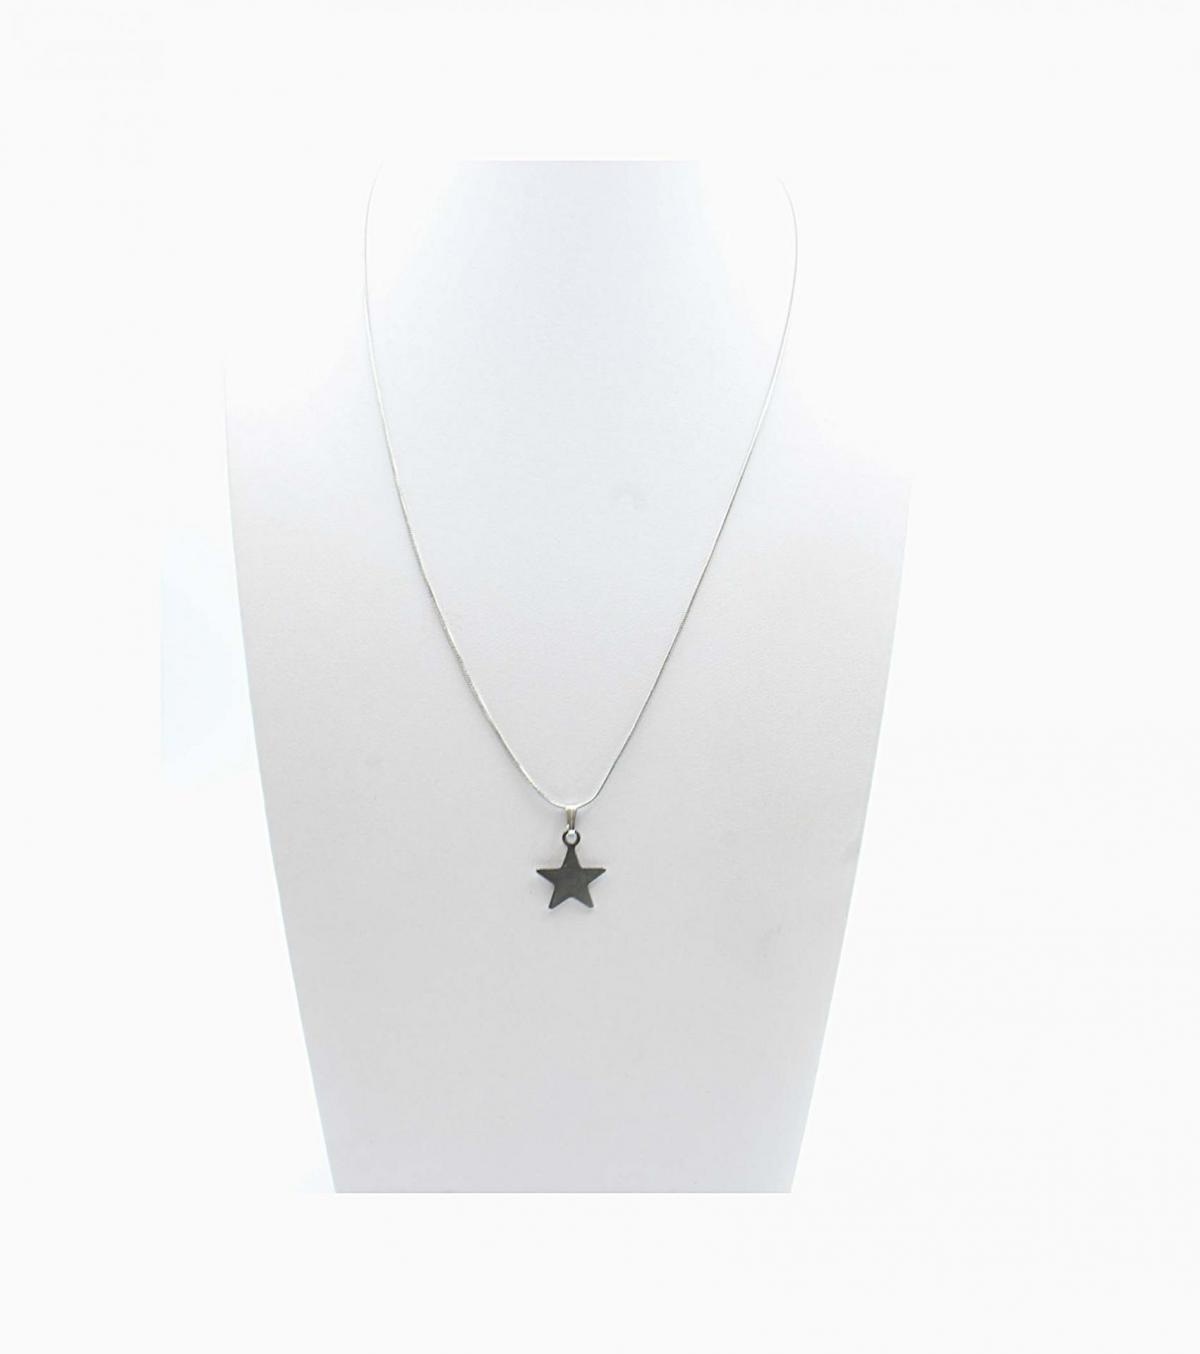 Star Necklace Stainless Steel